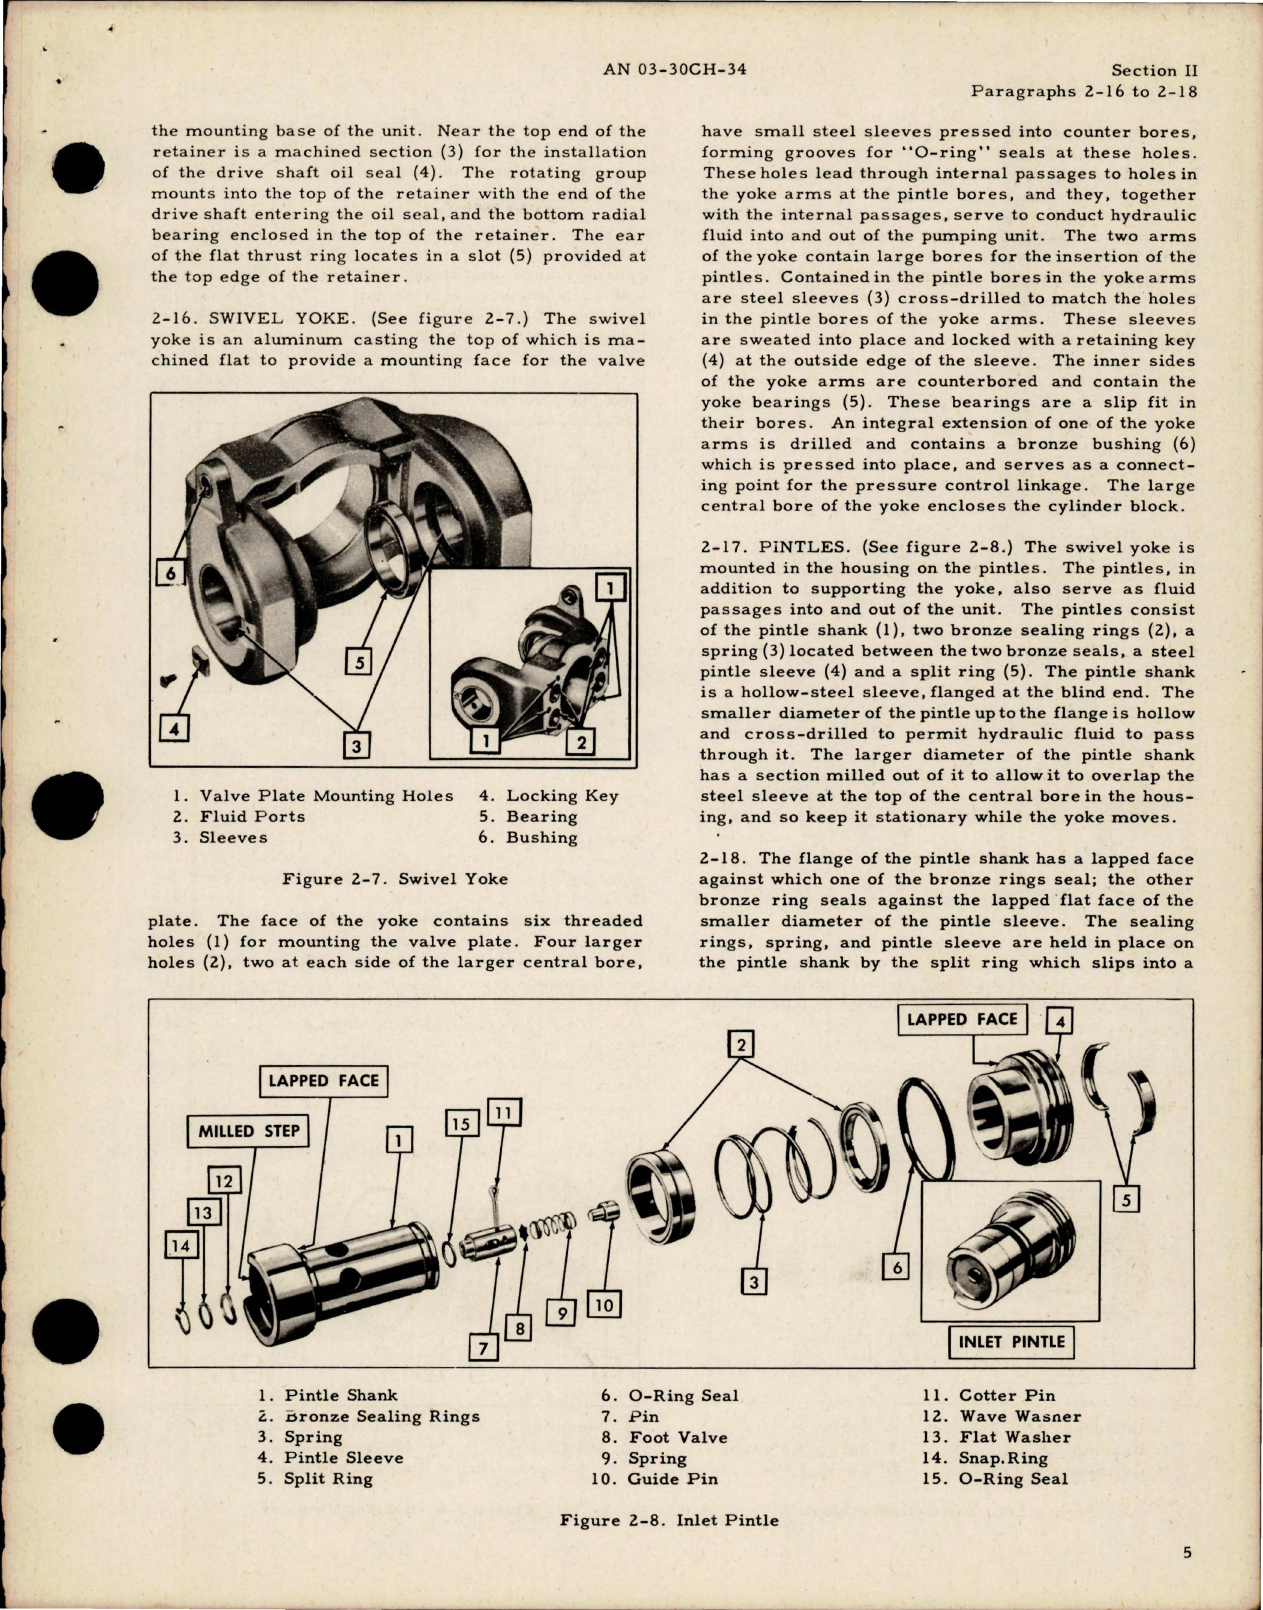 Sample page 9 from AirCorps Library document: Service and Overhaul Instructions with Parts Catalog for Variable Delivery Pump 